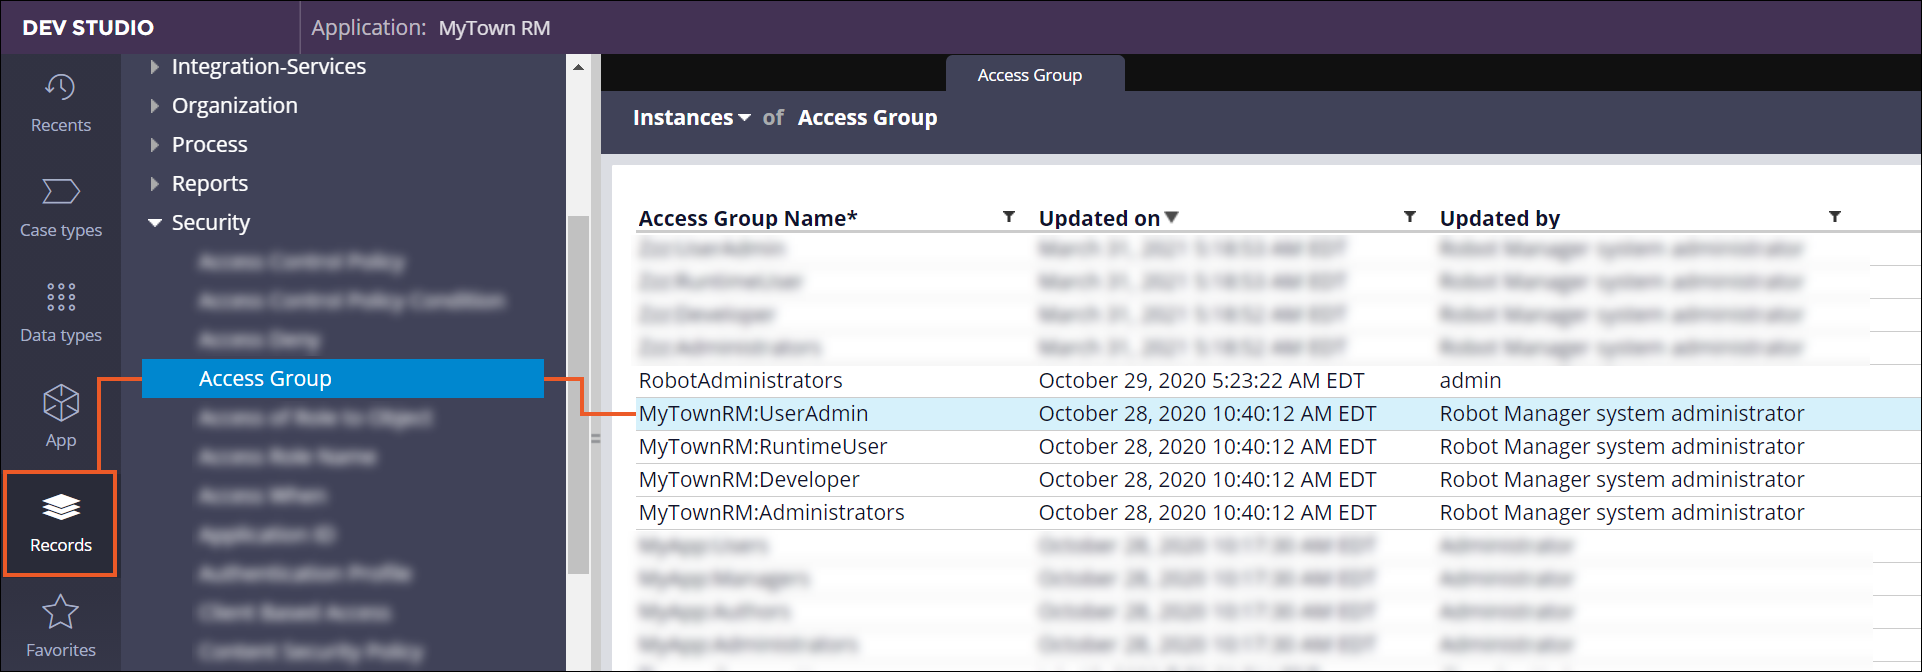 Add a new access group by modifying an existing one and saving it
                                as a separate record